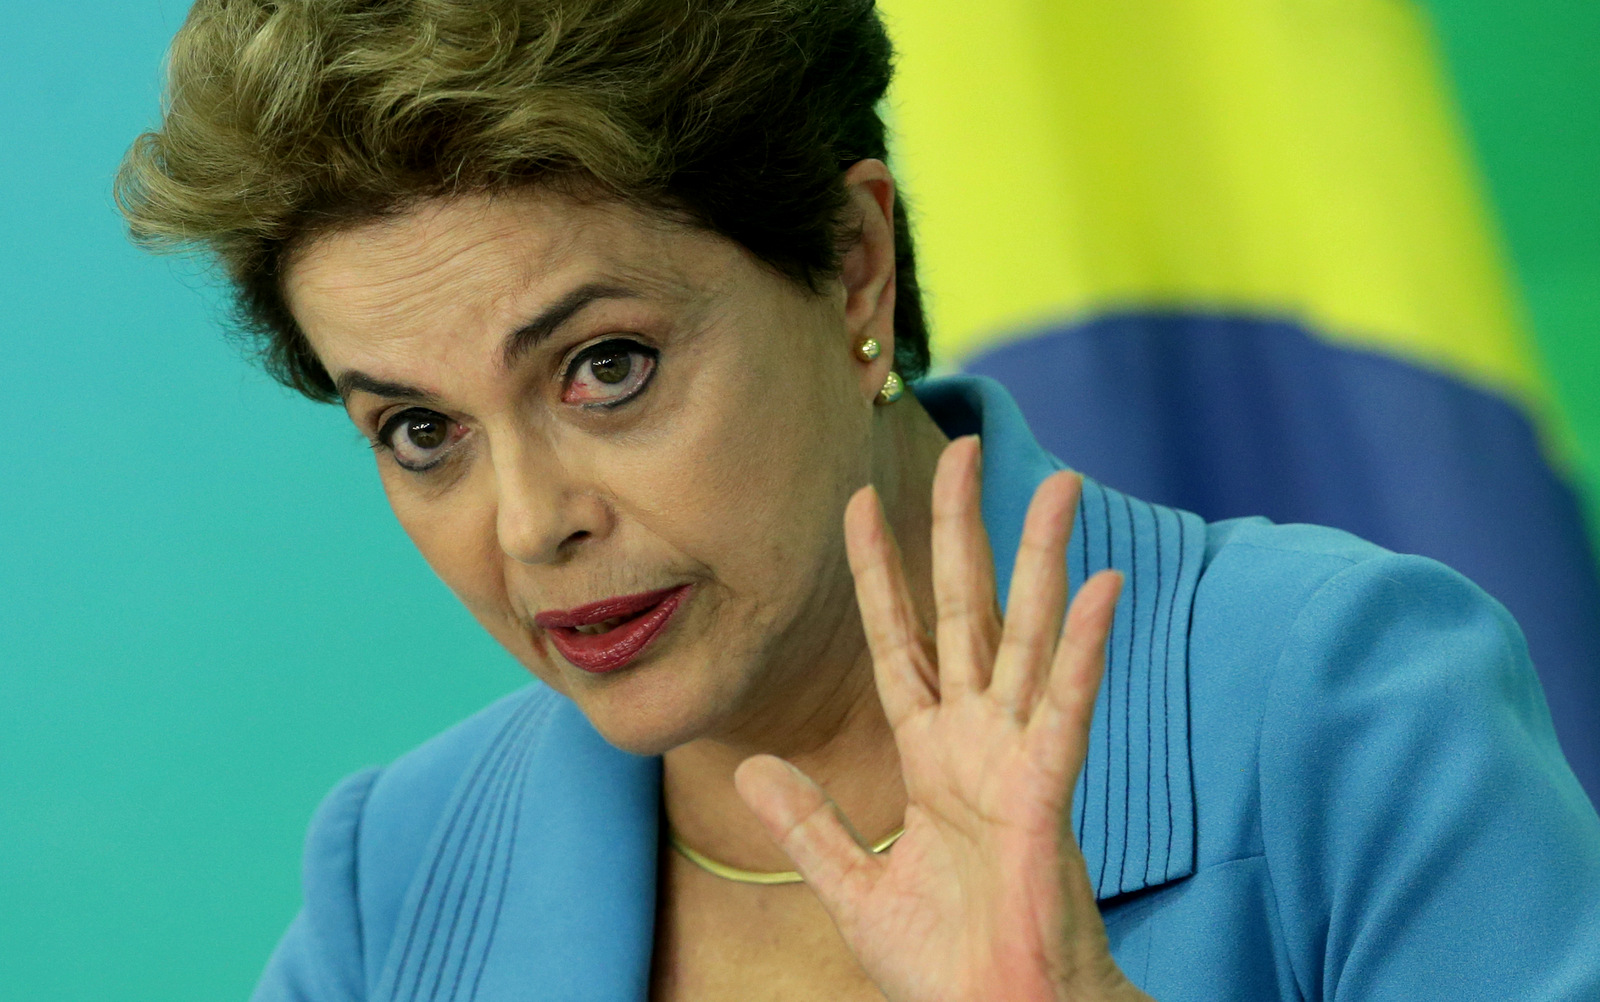 Brazil's President Dilma Rousseff speaks during a press conference about her impeachment process, at Planalto Presidential Palace, in Brasilia, Monday, April 18, 2016. President Rousseff appeared on the verge of losing office after a congressional vote to impeach her and signs suggested only tenuous support for her in the Senate, which will decide whether to remove her amid a political and economic crisis. (AP Photo/Eraldo Peres)